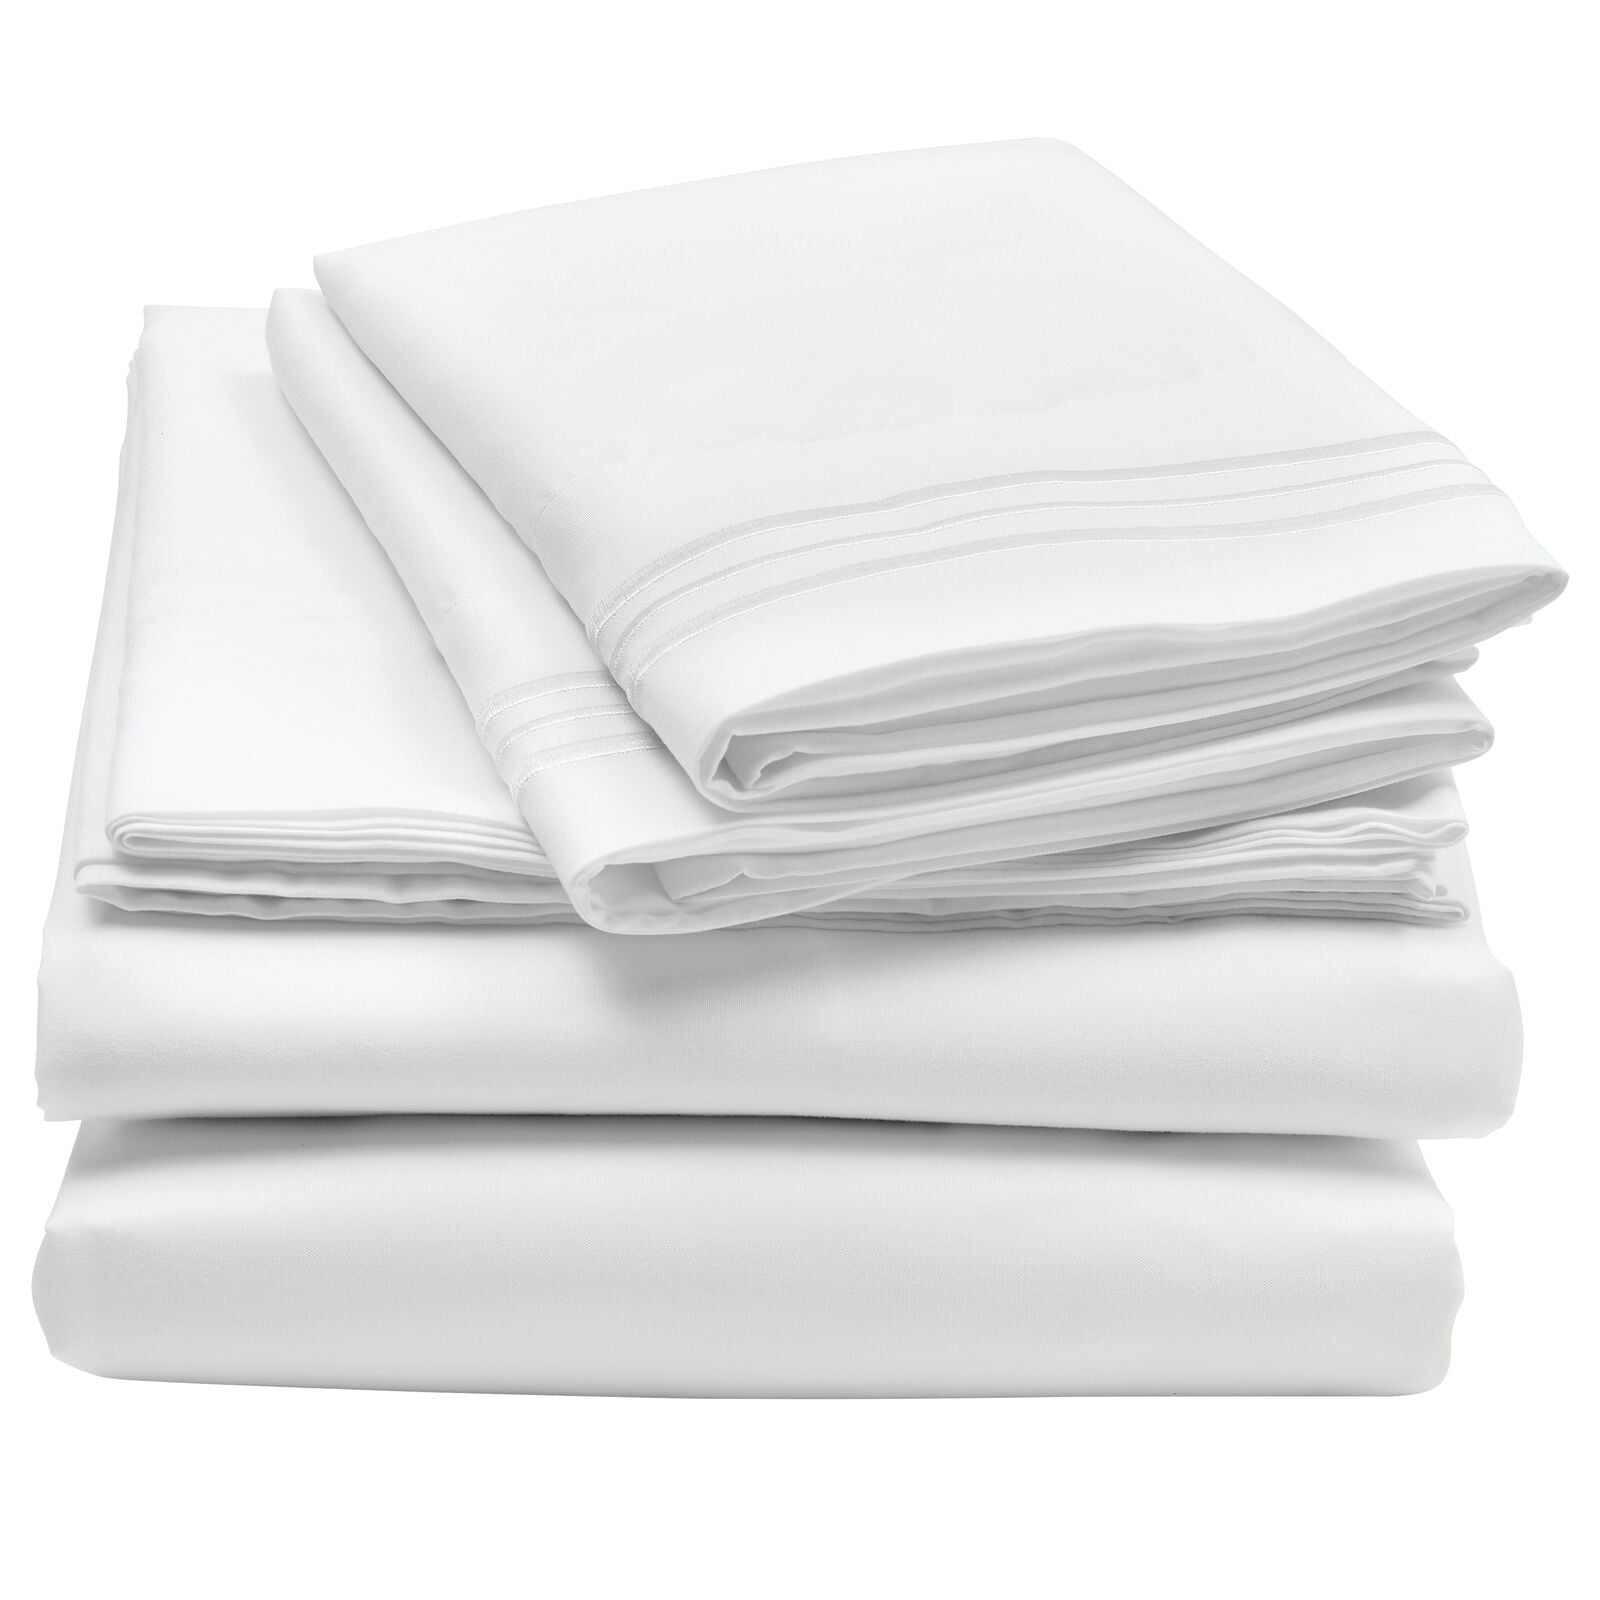 3 Pieces Wrinkle Resistant Comfortable mDesign Twin XL Size Superfine Brushed Microfiber Sheet Set White Extra Soft Bed Sheets and Pillowcase Easy Fit Deep Pockets & Breathable 